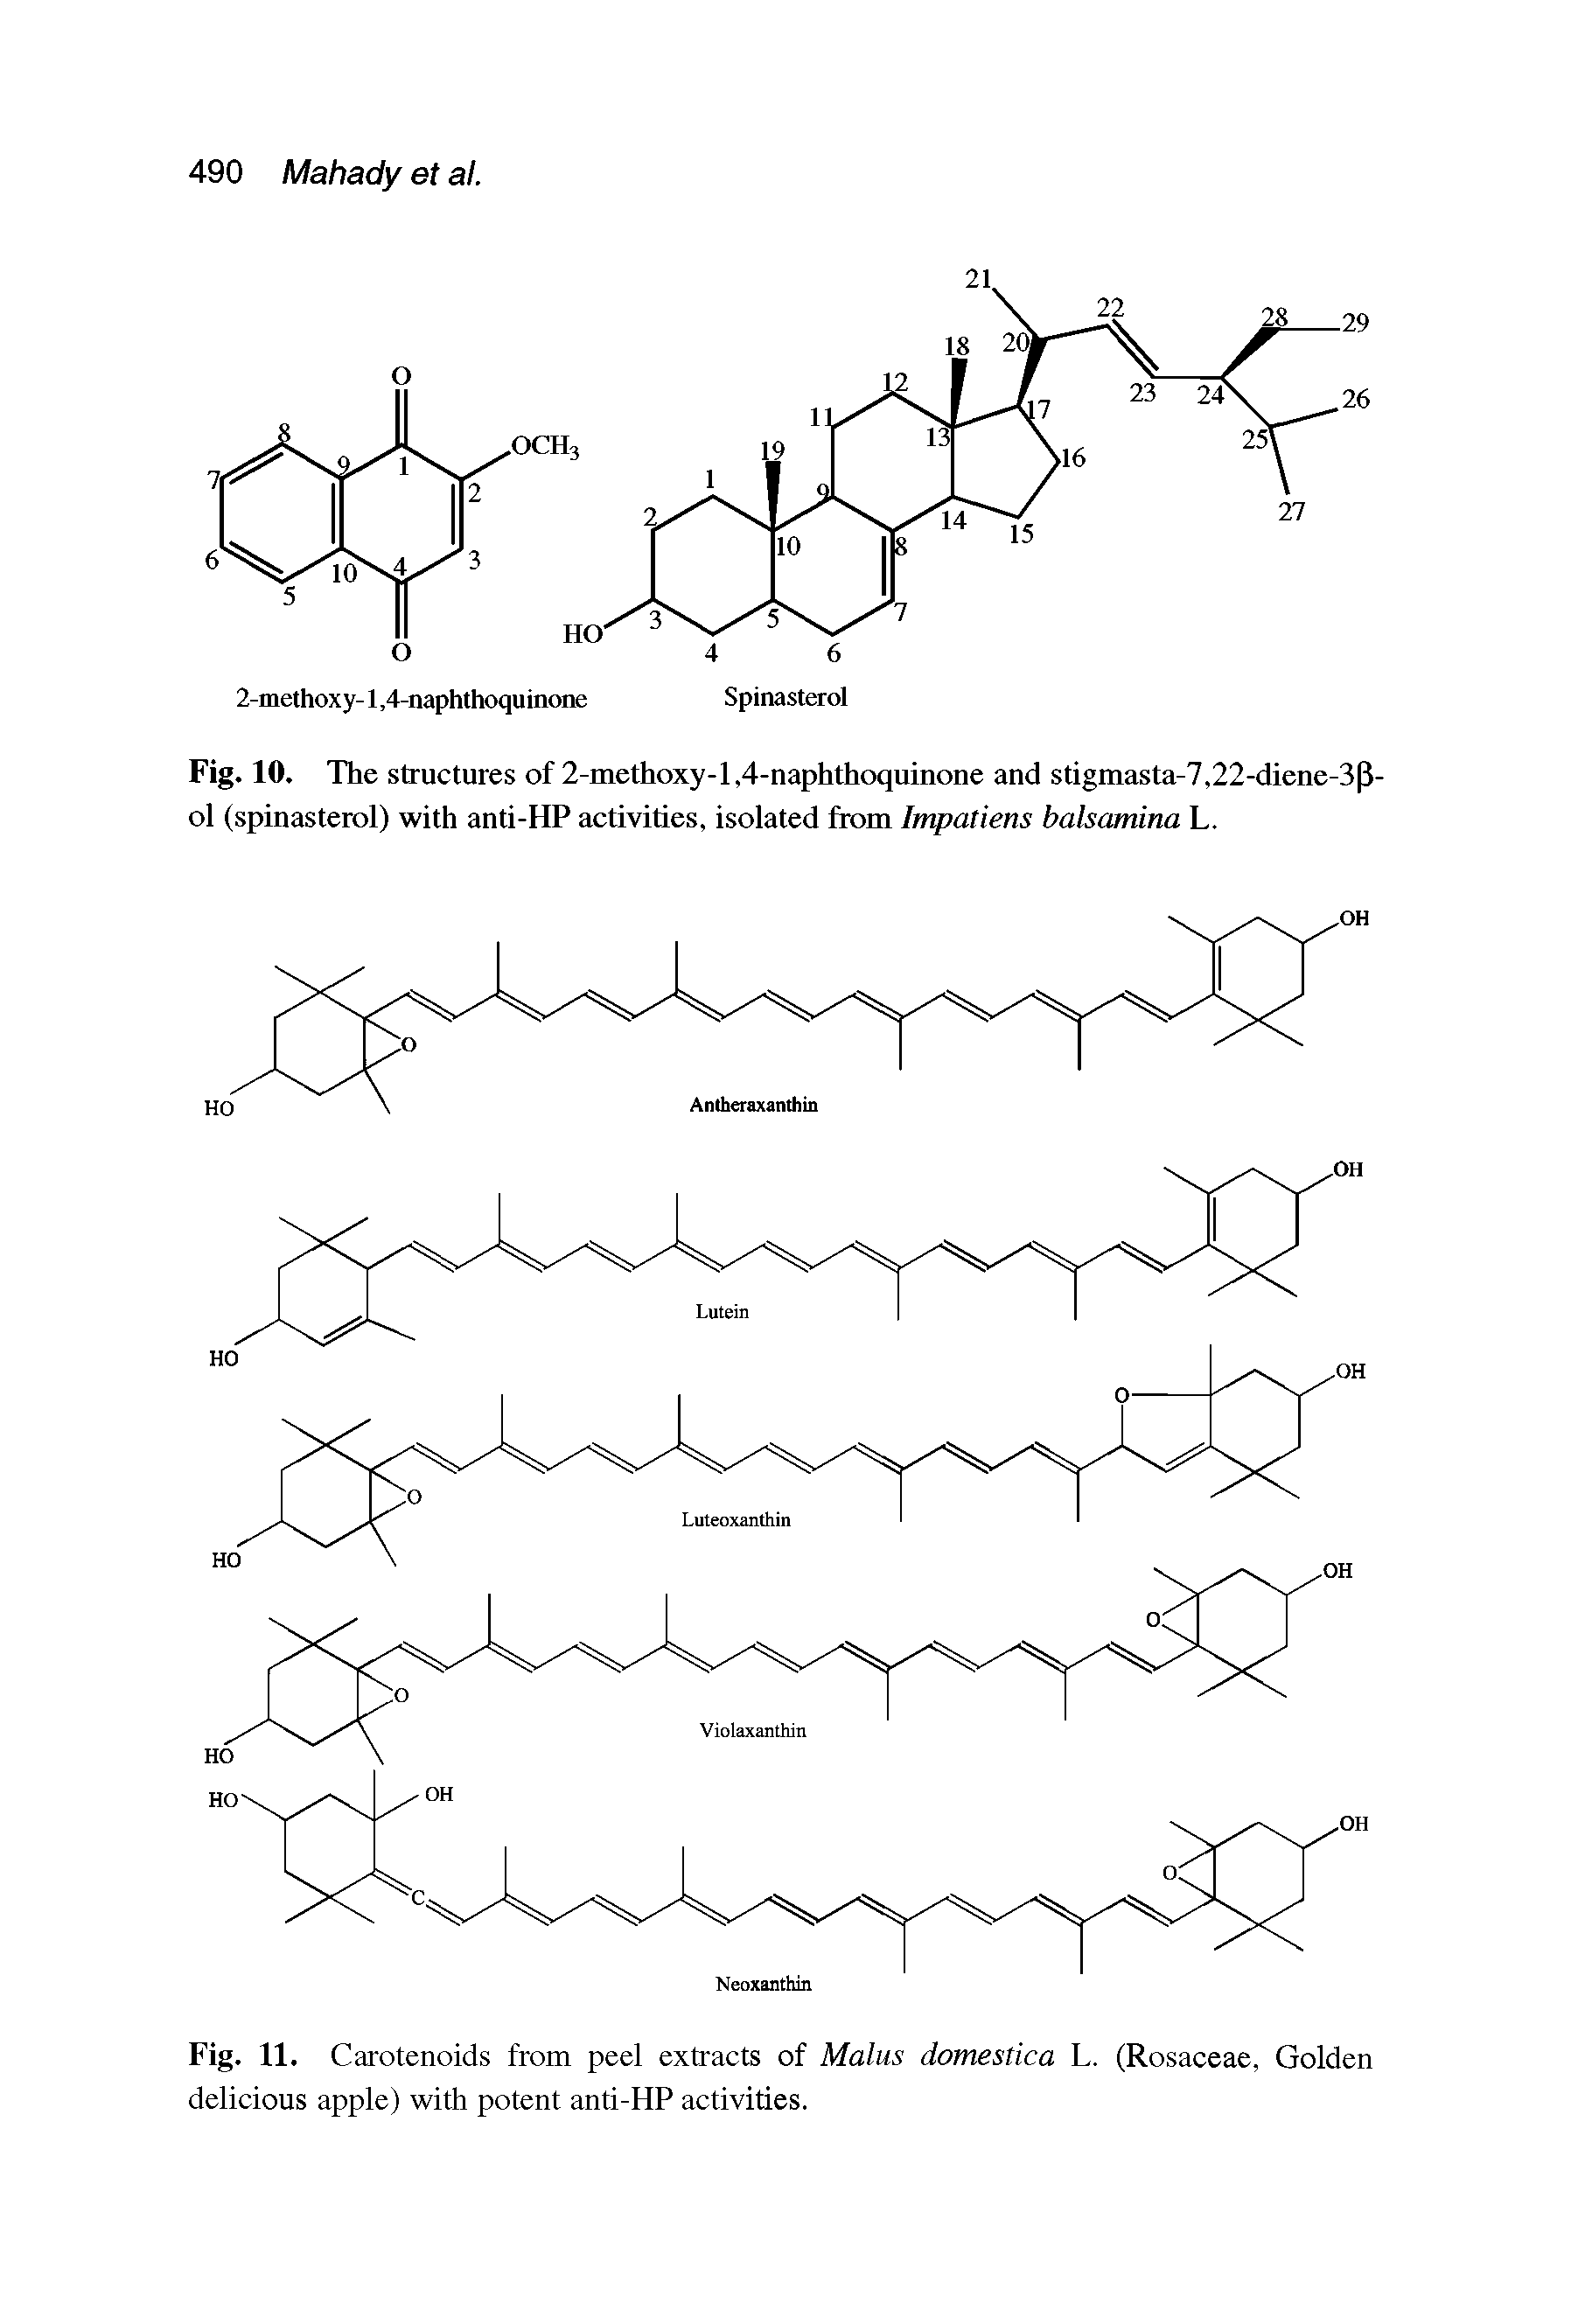 Fig. 10. The structures of 2-methoxy-1,4-naphthoquinone and stigmasta-7,22-diene-3P-ol (spinasterol) with anti-HP activities, isolated from Impatiens balsamina L.